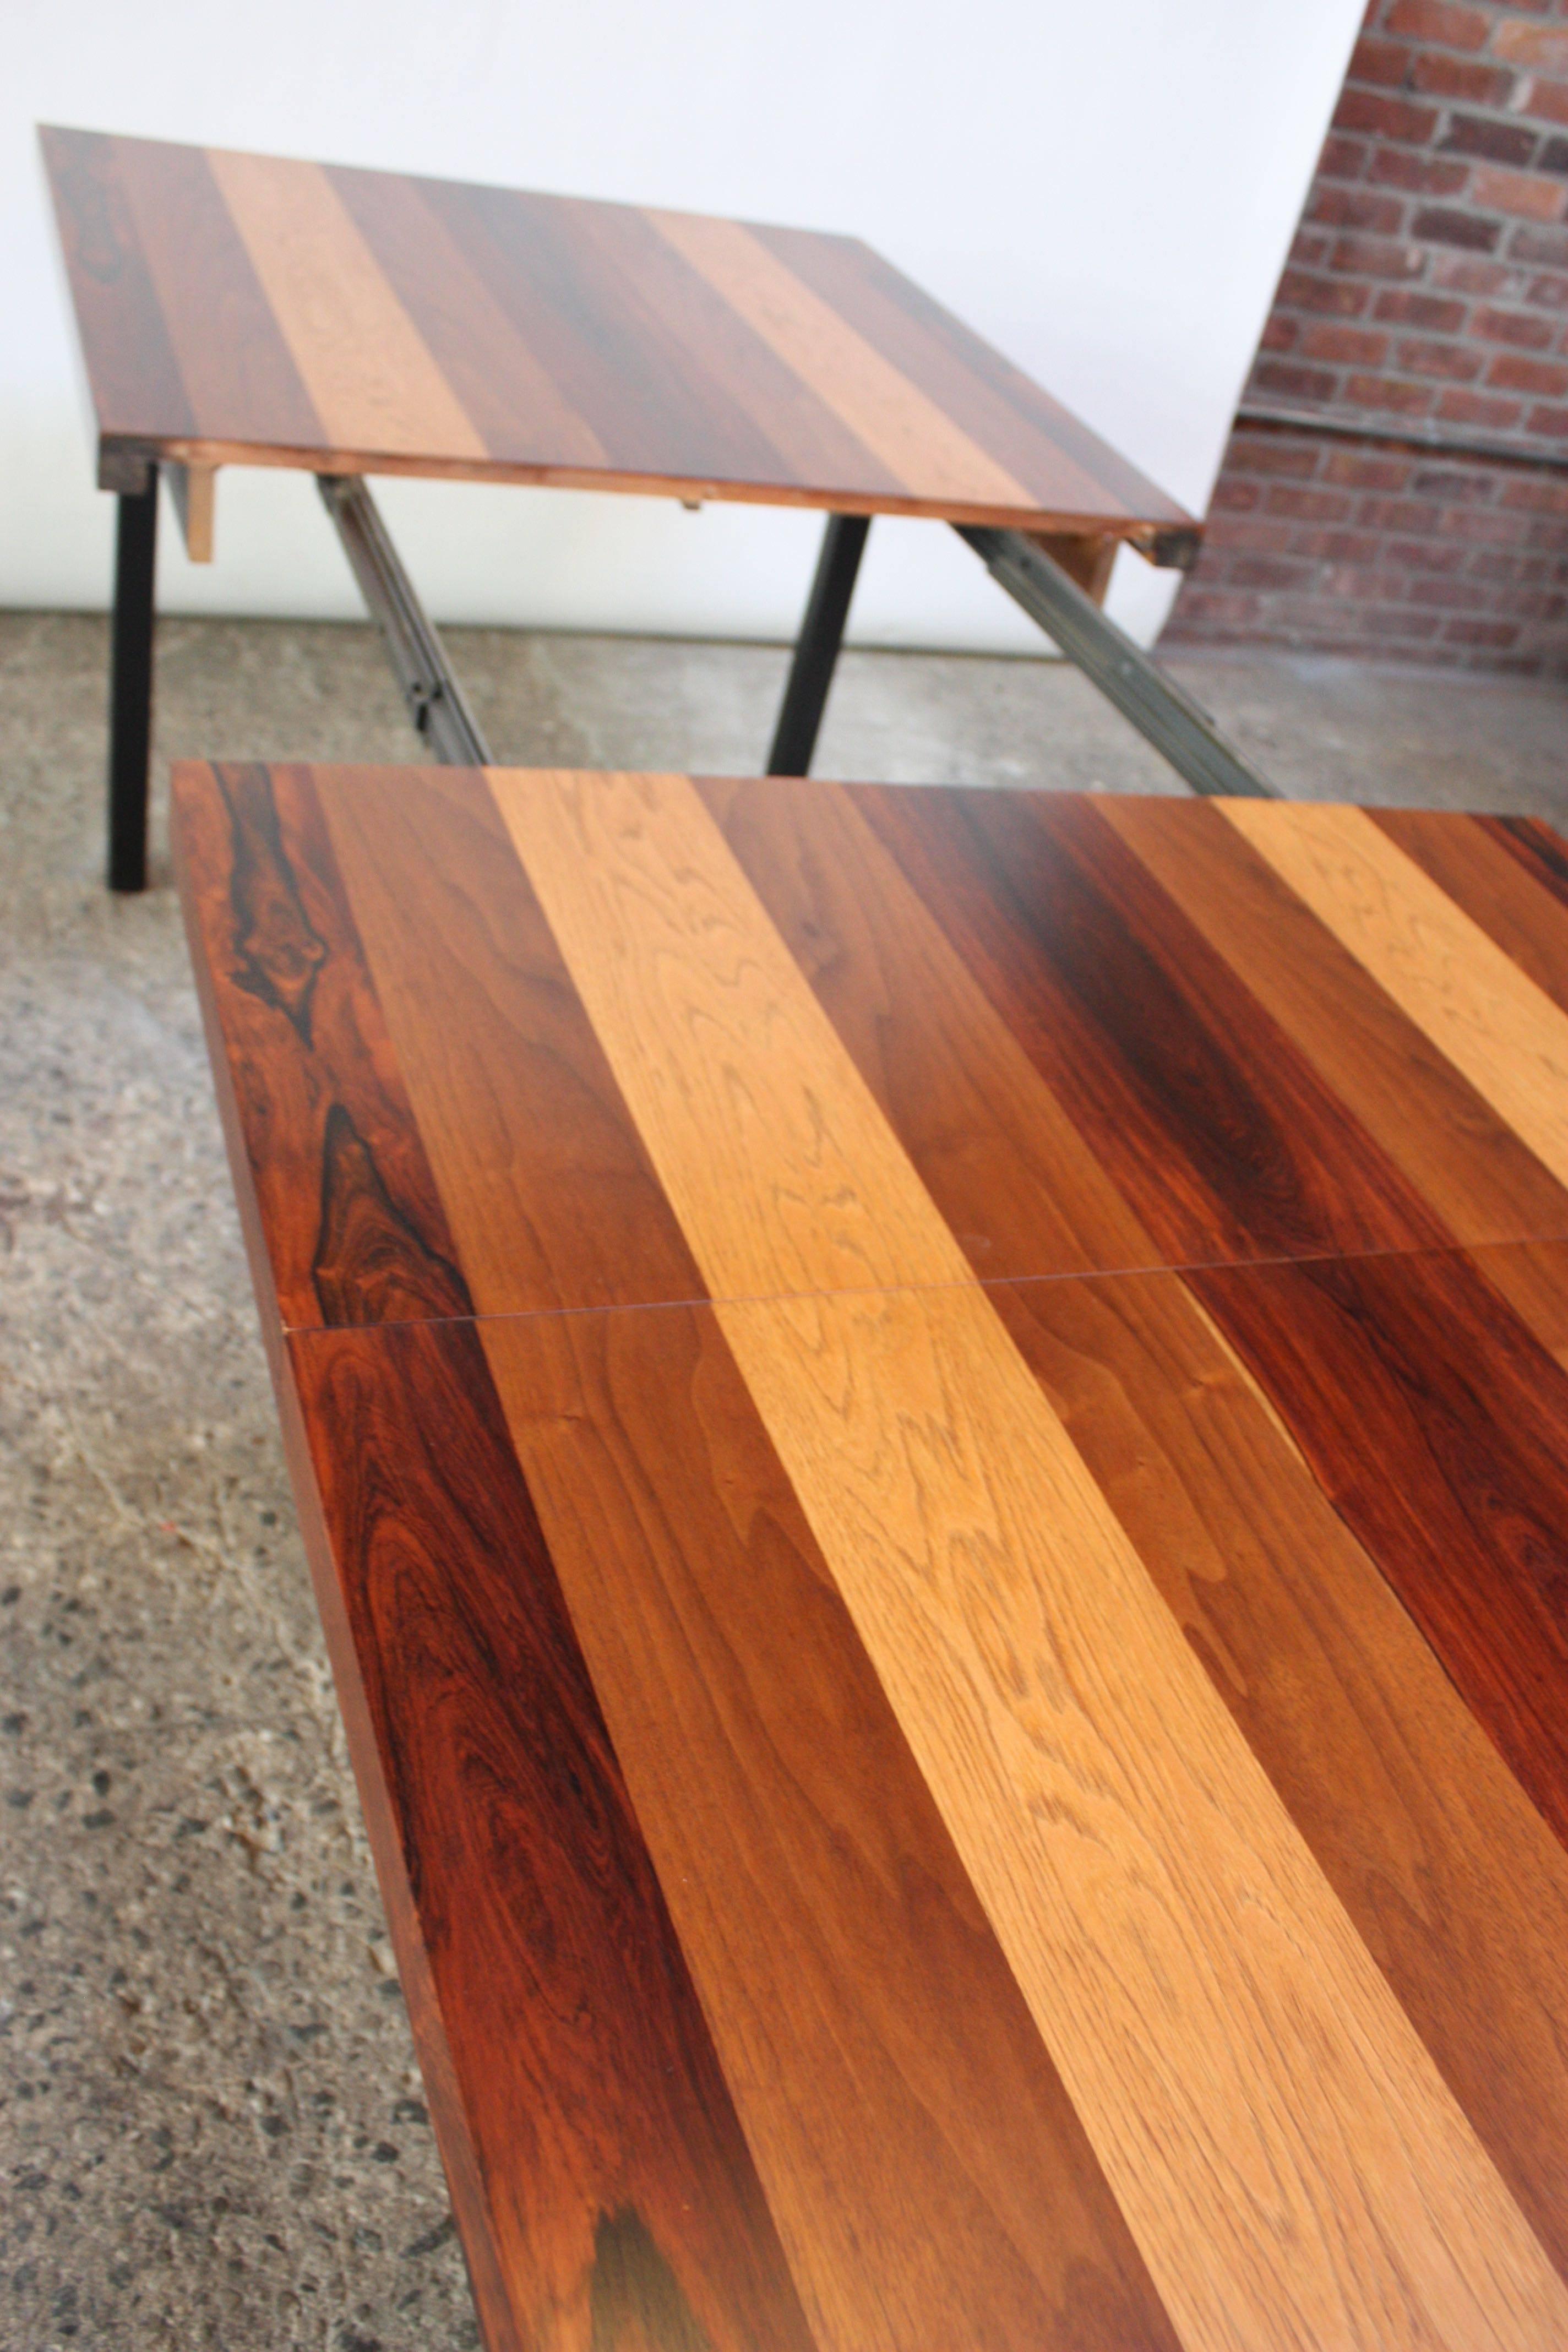 Mid-20th Century Directional Mixed-Wood Dining Table by Milo Baughman